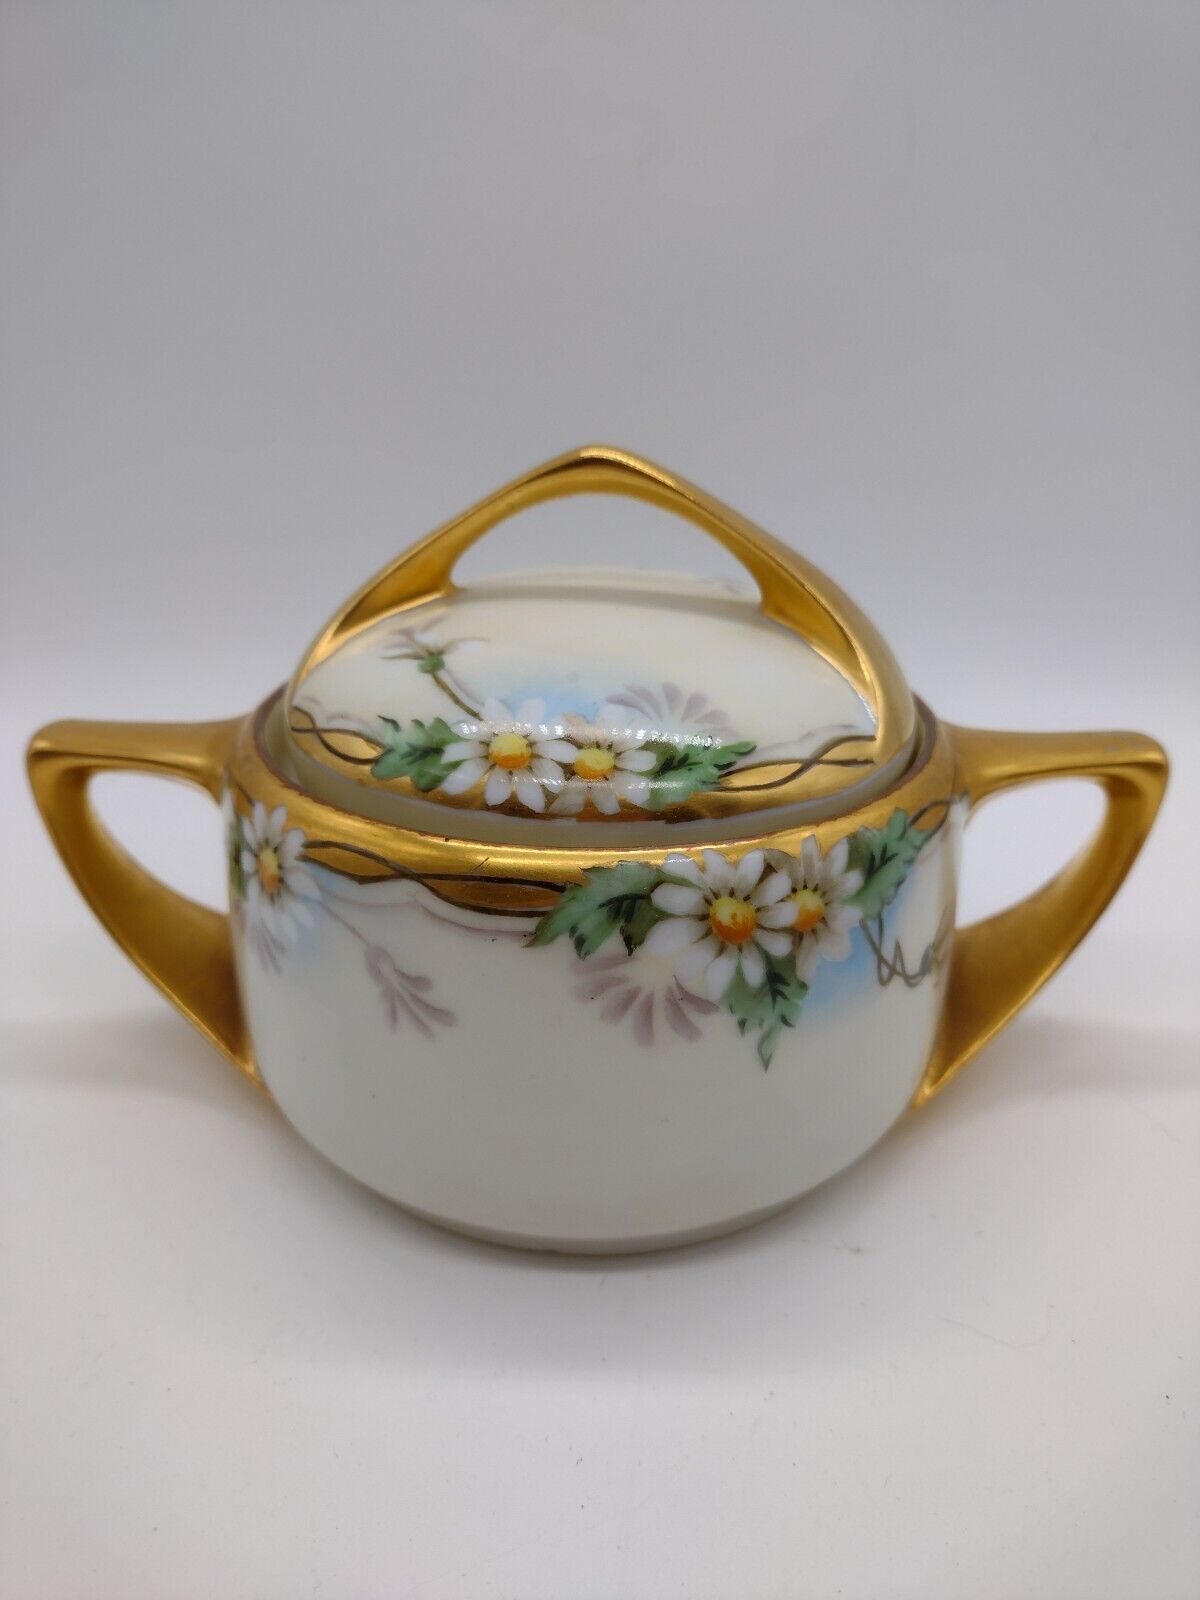 Hand painted Vintage Rosenthal Covered Porcelain Sugar Bowl With Daisy Design